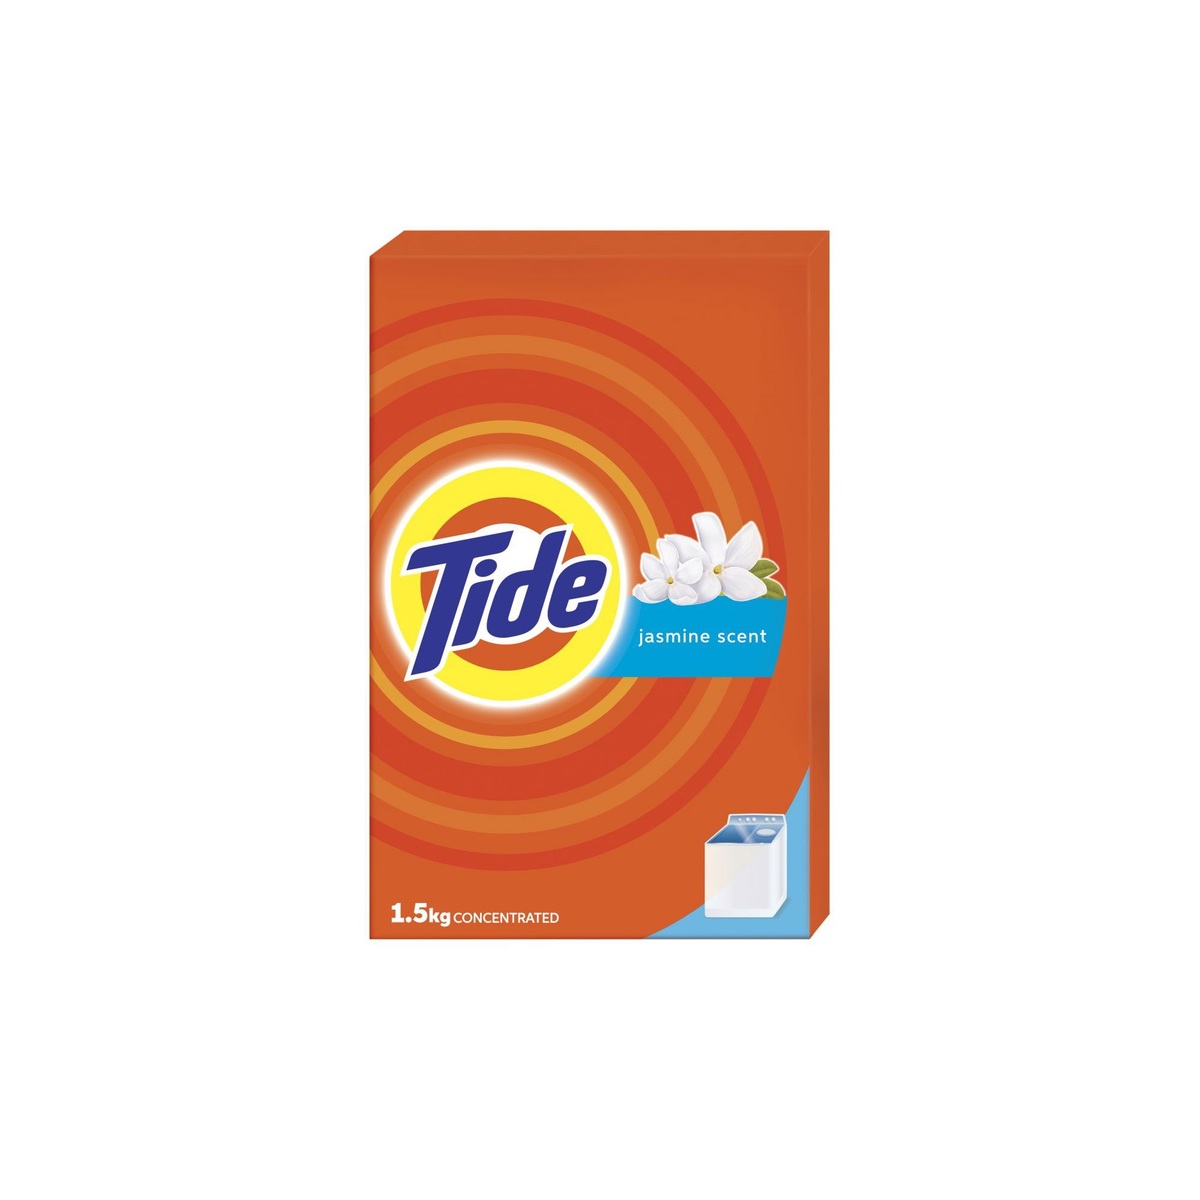 Tide Washing Powder Concentrated With Jasmine 1.5kg